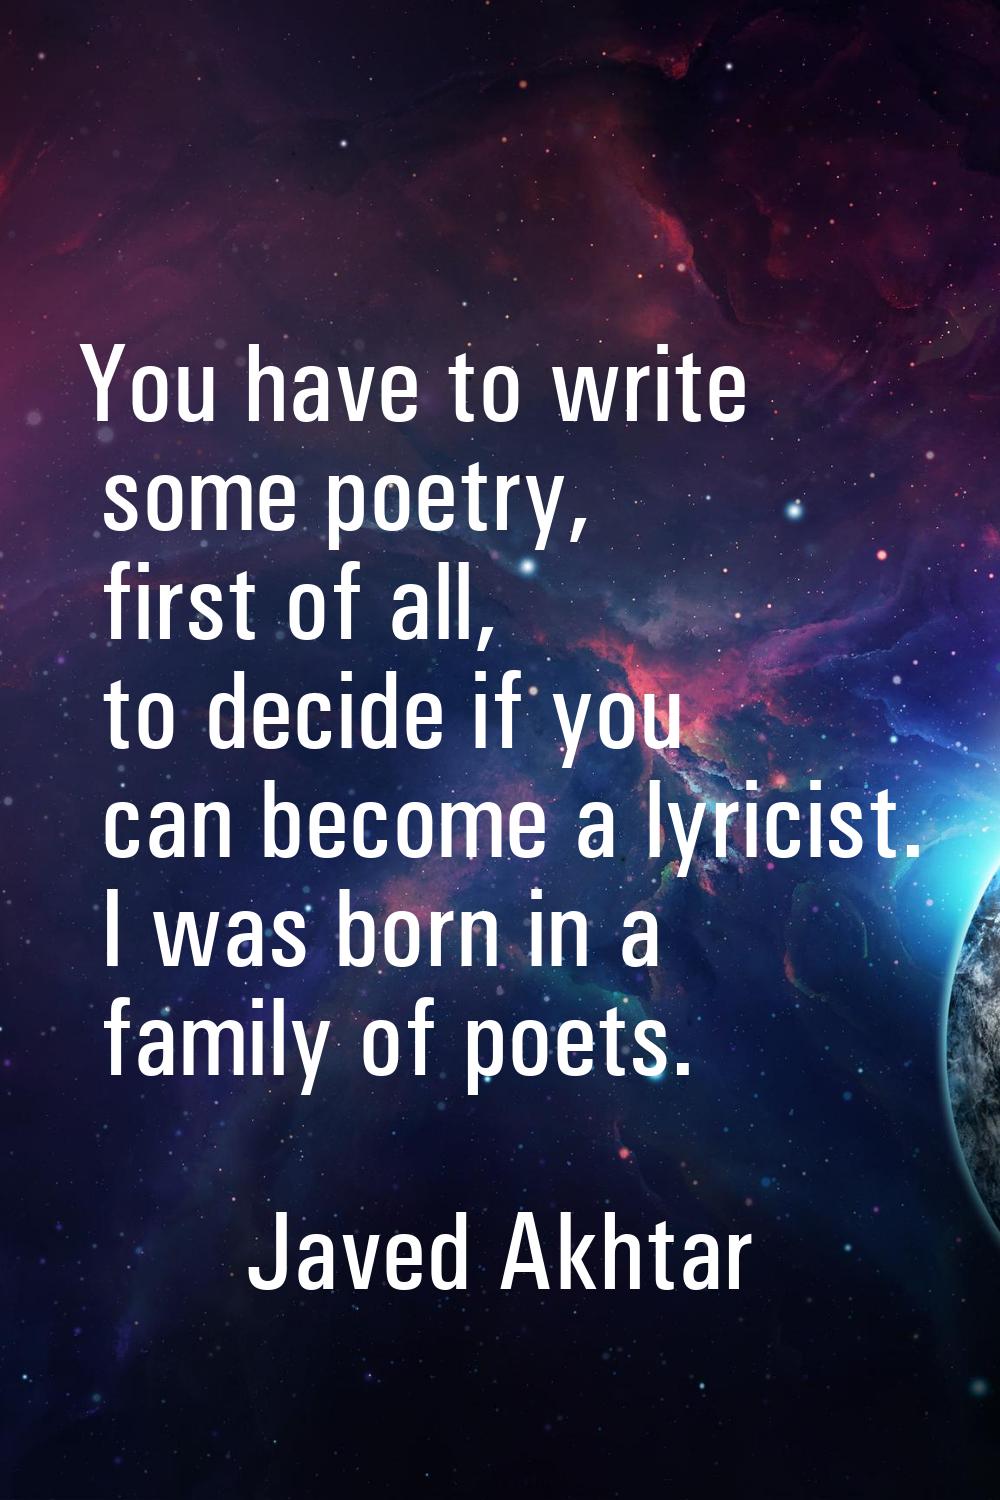 You have to write some poetry, first of all, to decide if you can become a lyricist. I was born in 